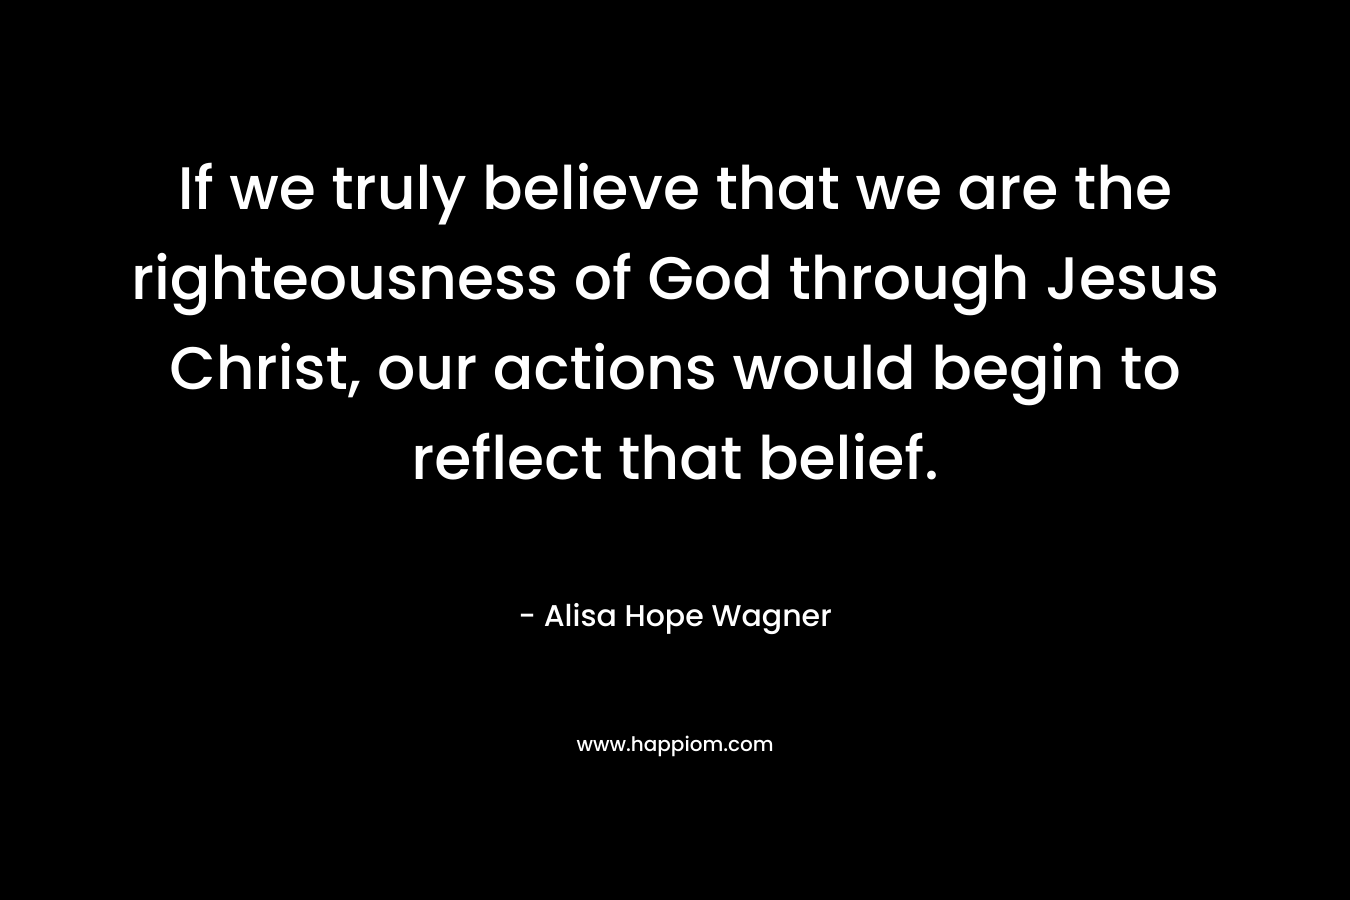 If we truly believe that we are the righteousness of God through Jesus Christ, our actions would begin to reflect that belief. – Alisa Hope Wagner